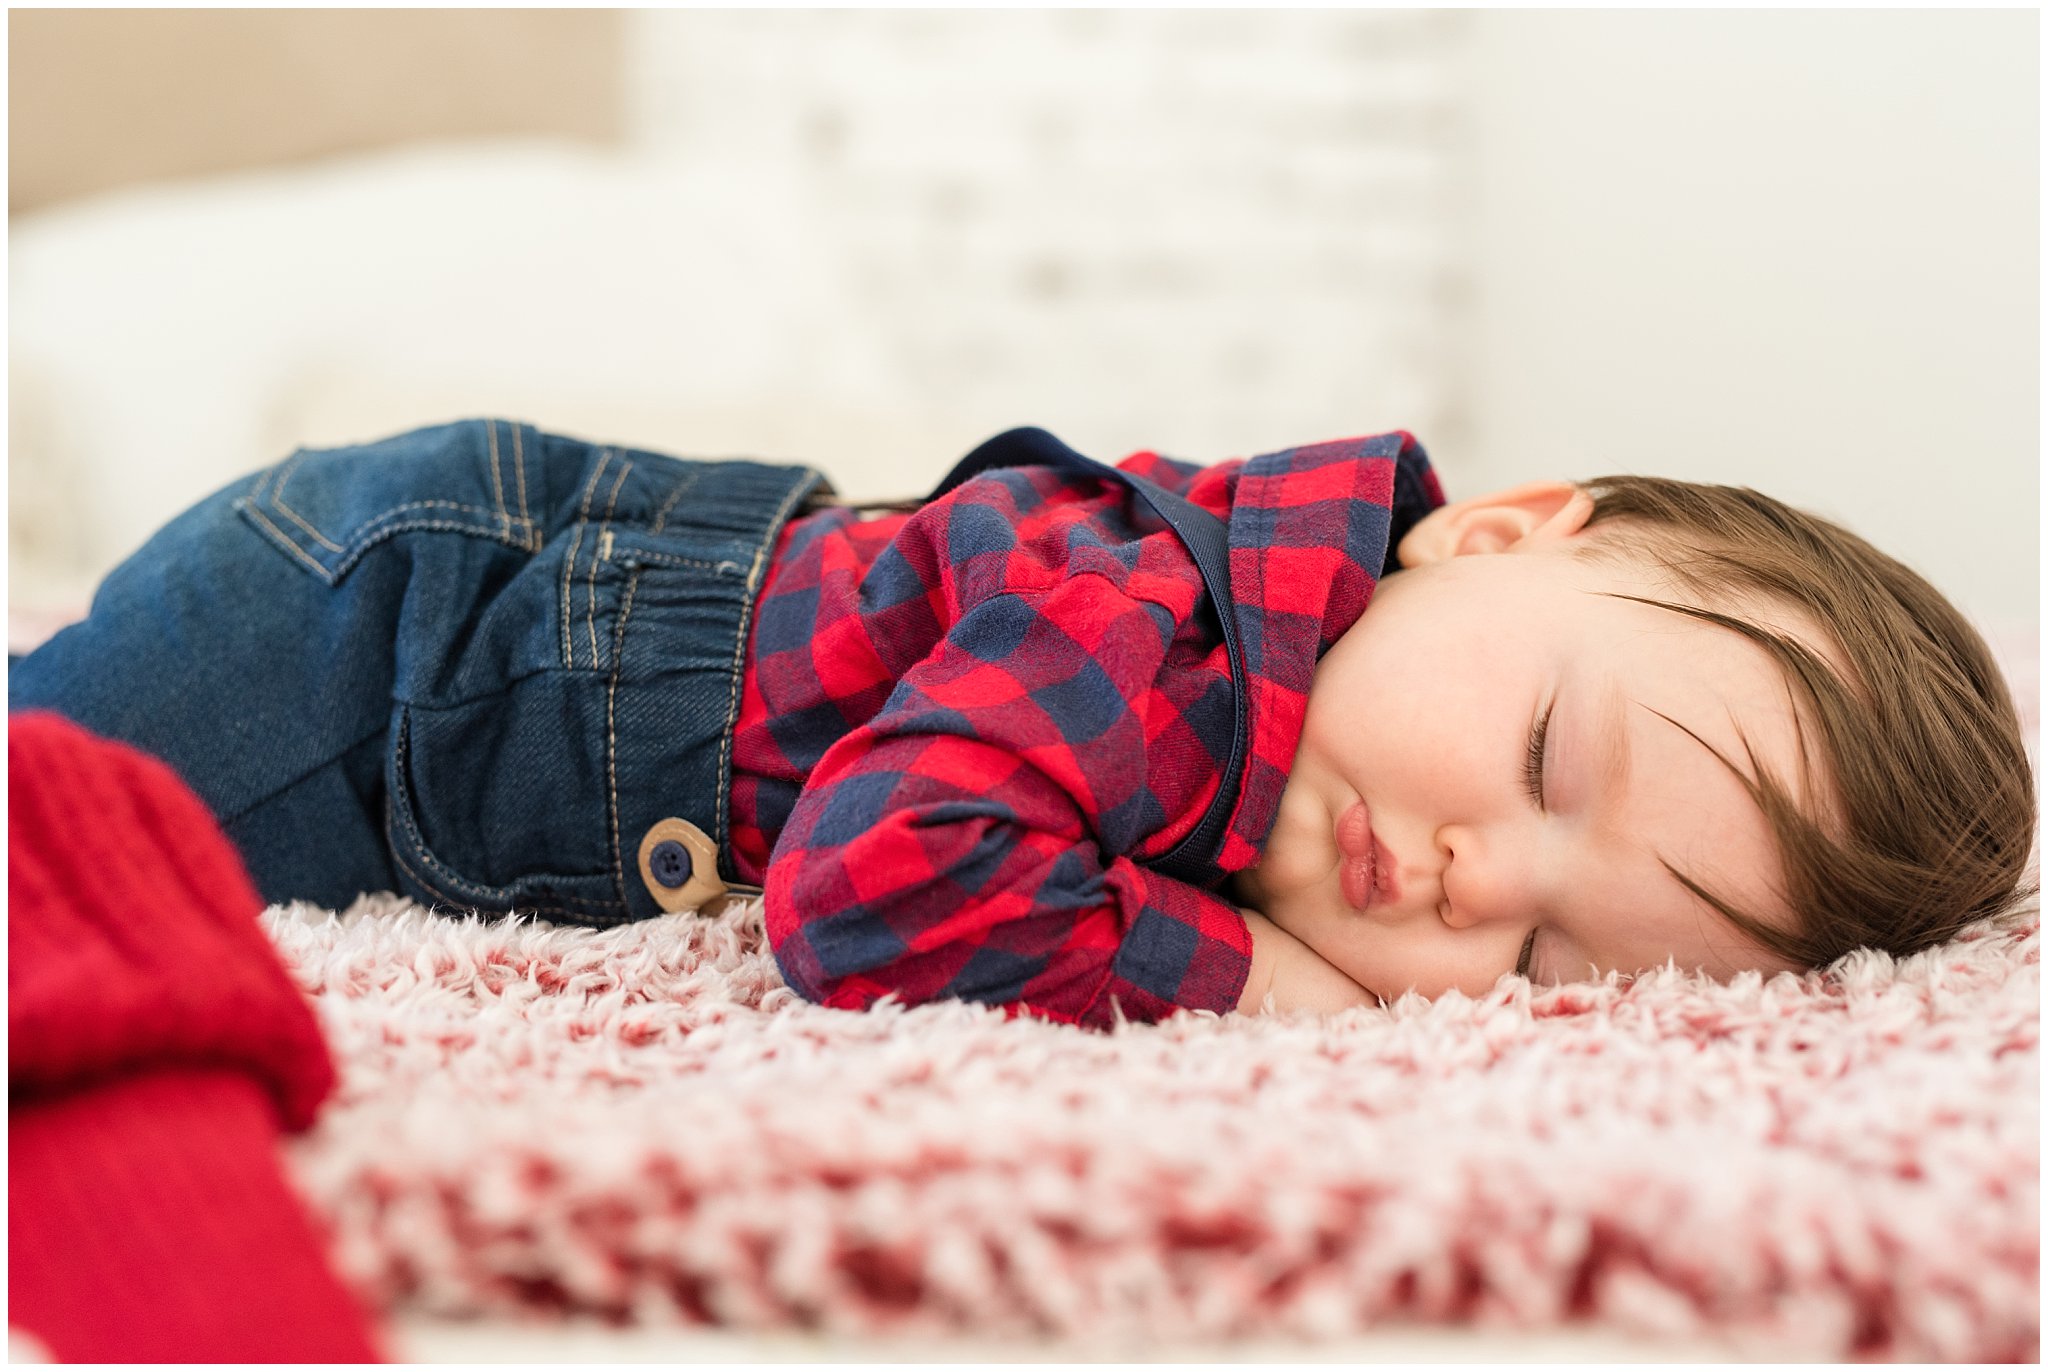 Baby boy asleep on the bed | Family Christmas session at the 5th floor | Utah Photographers | Jessie and Dallin Photography